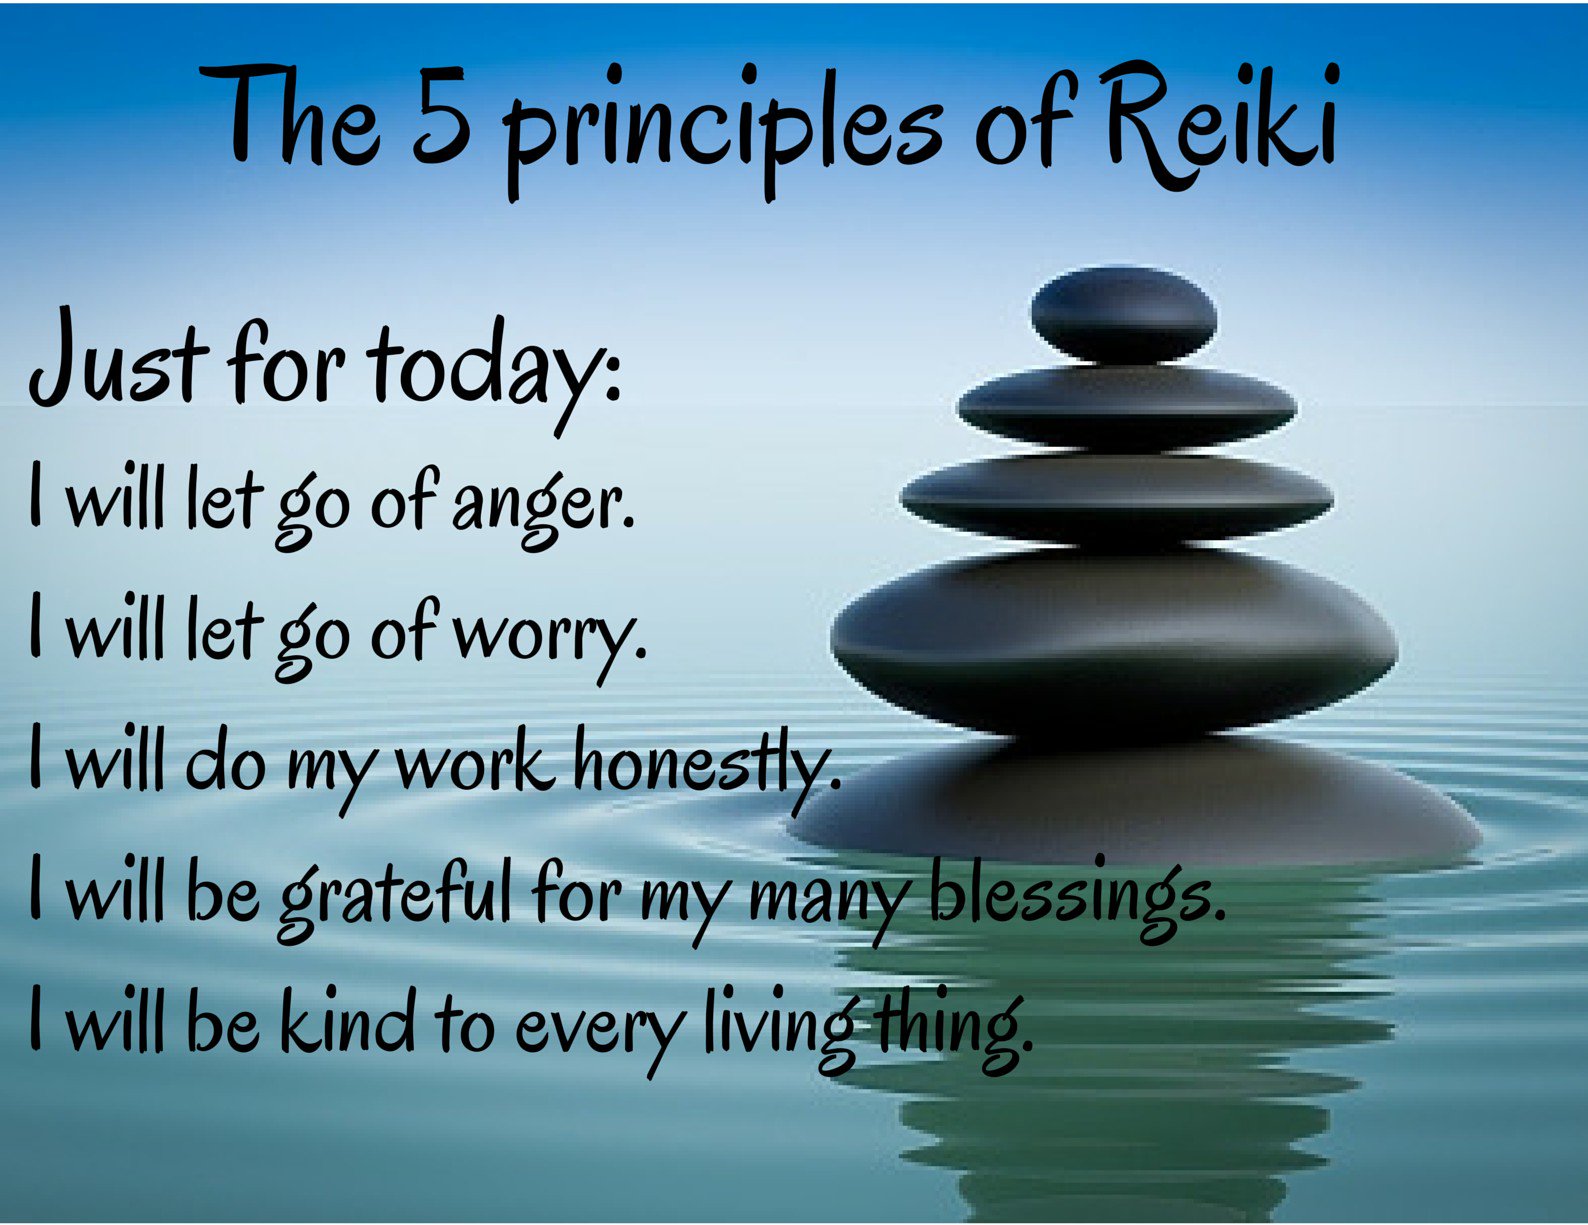 A stack of stones with the 5 principles of reiki